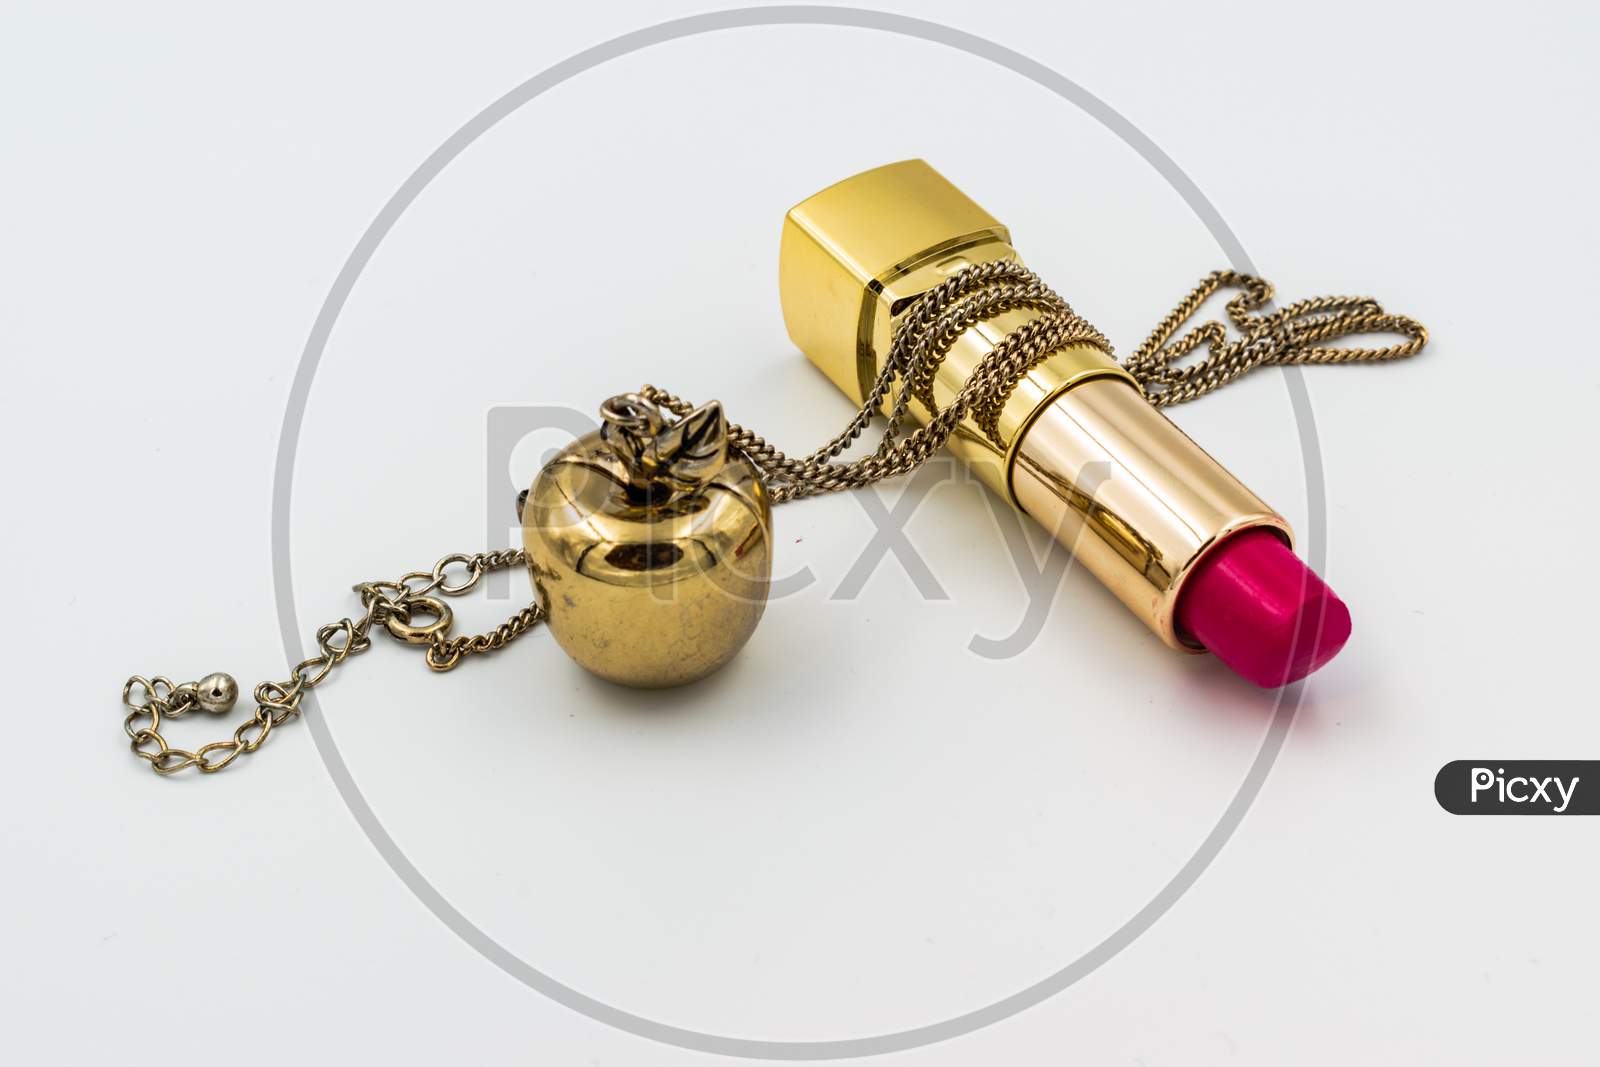 Pink Lipstick With A Golden Necklace Isolated On White Background